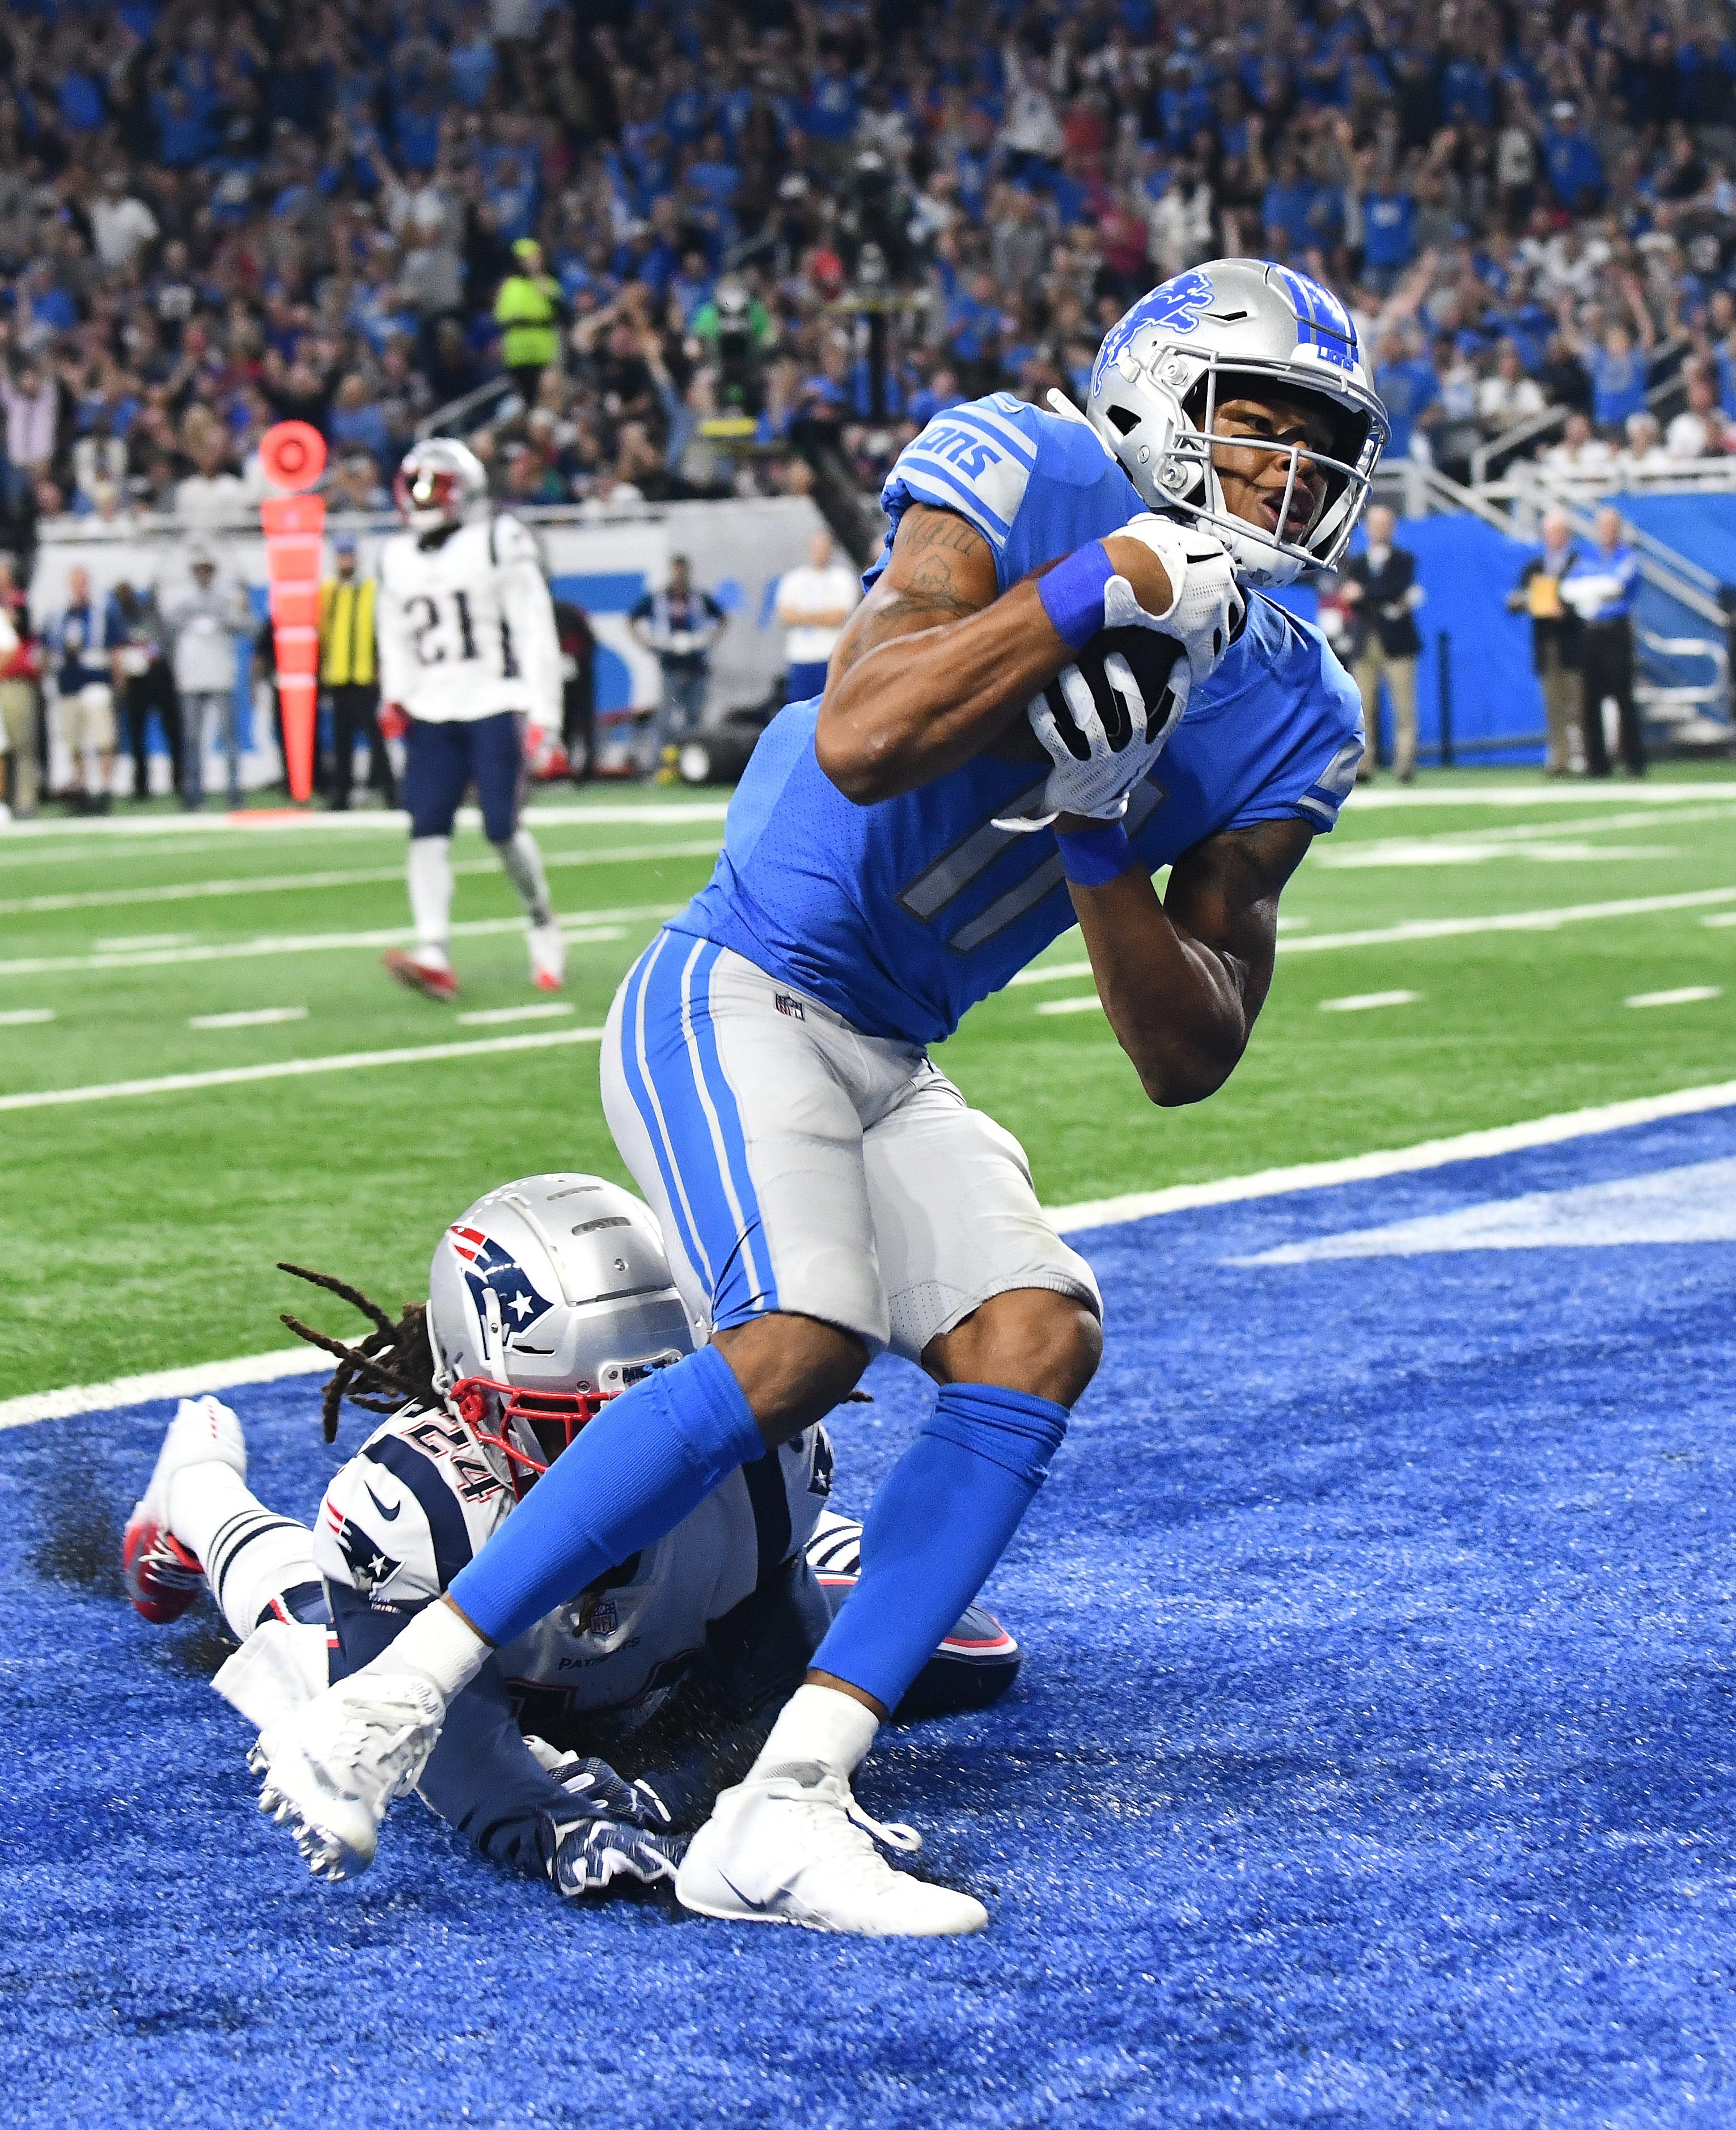 Lions wide receiver Marvin Jones Jr. readies for a touchdown reception in front of Patriots ' Stephon Gilmore in the third quarter.